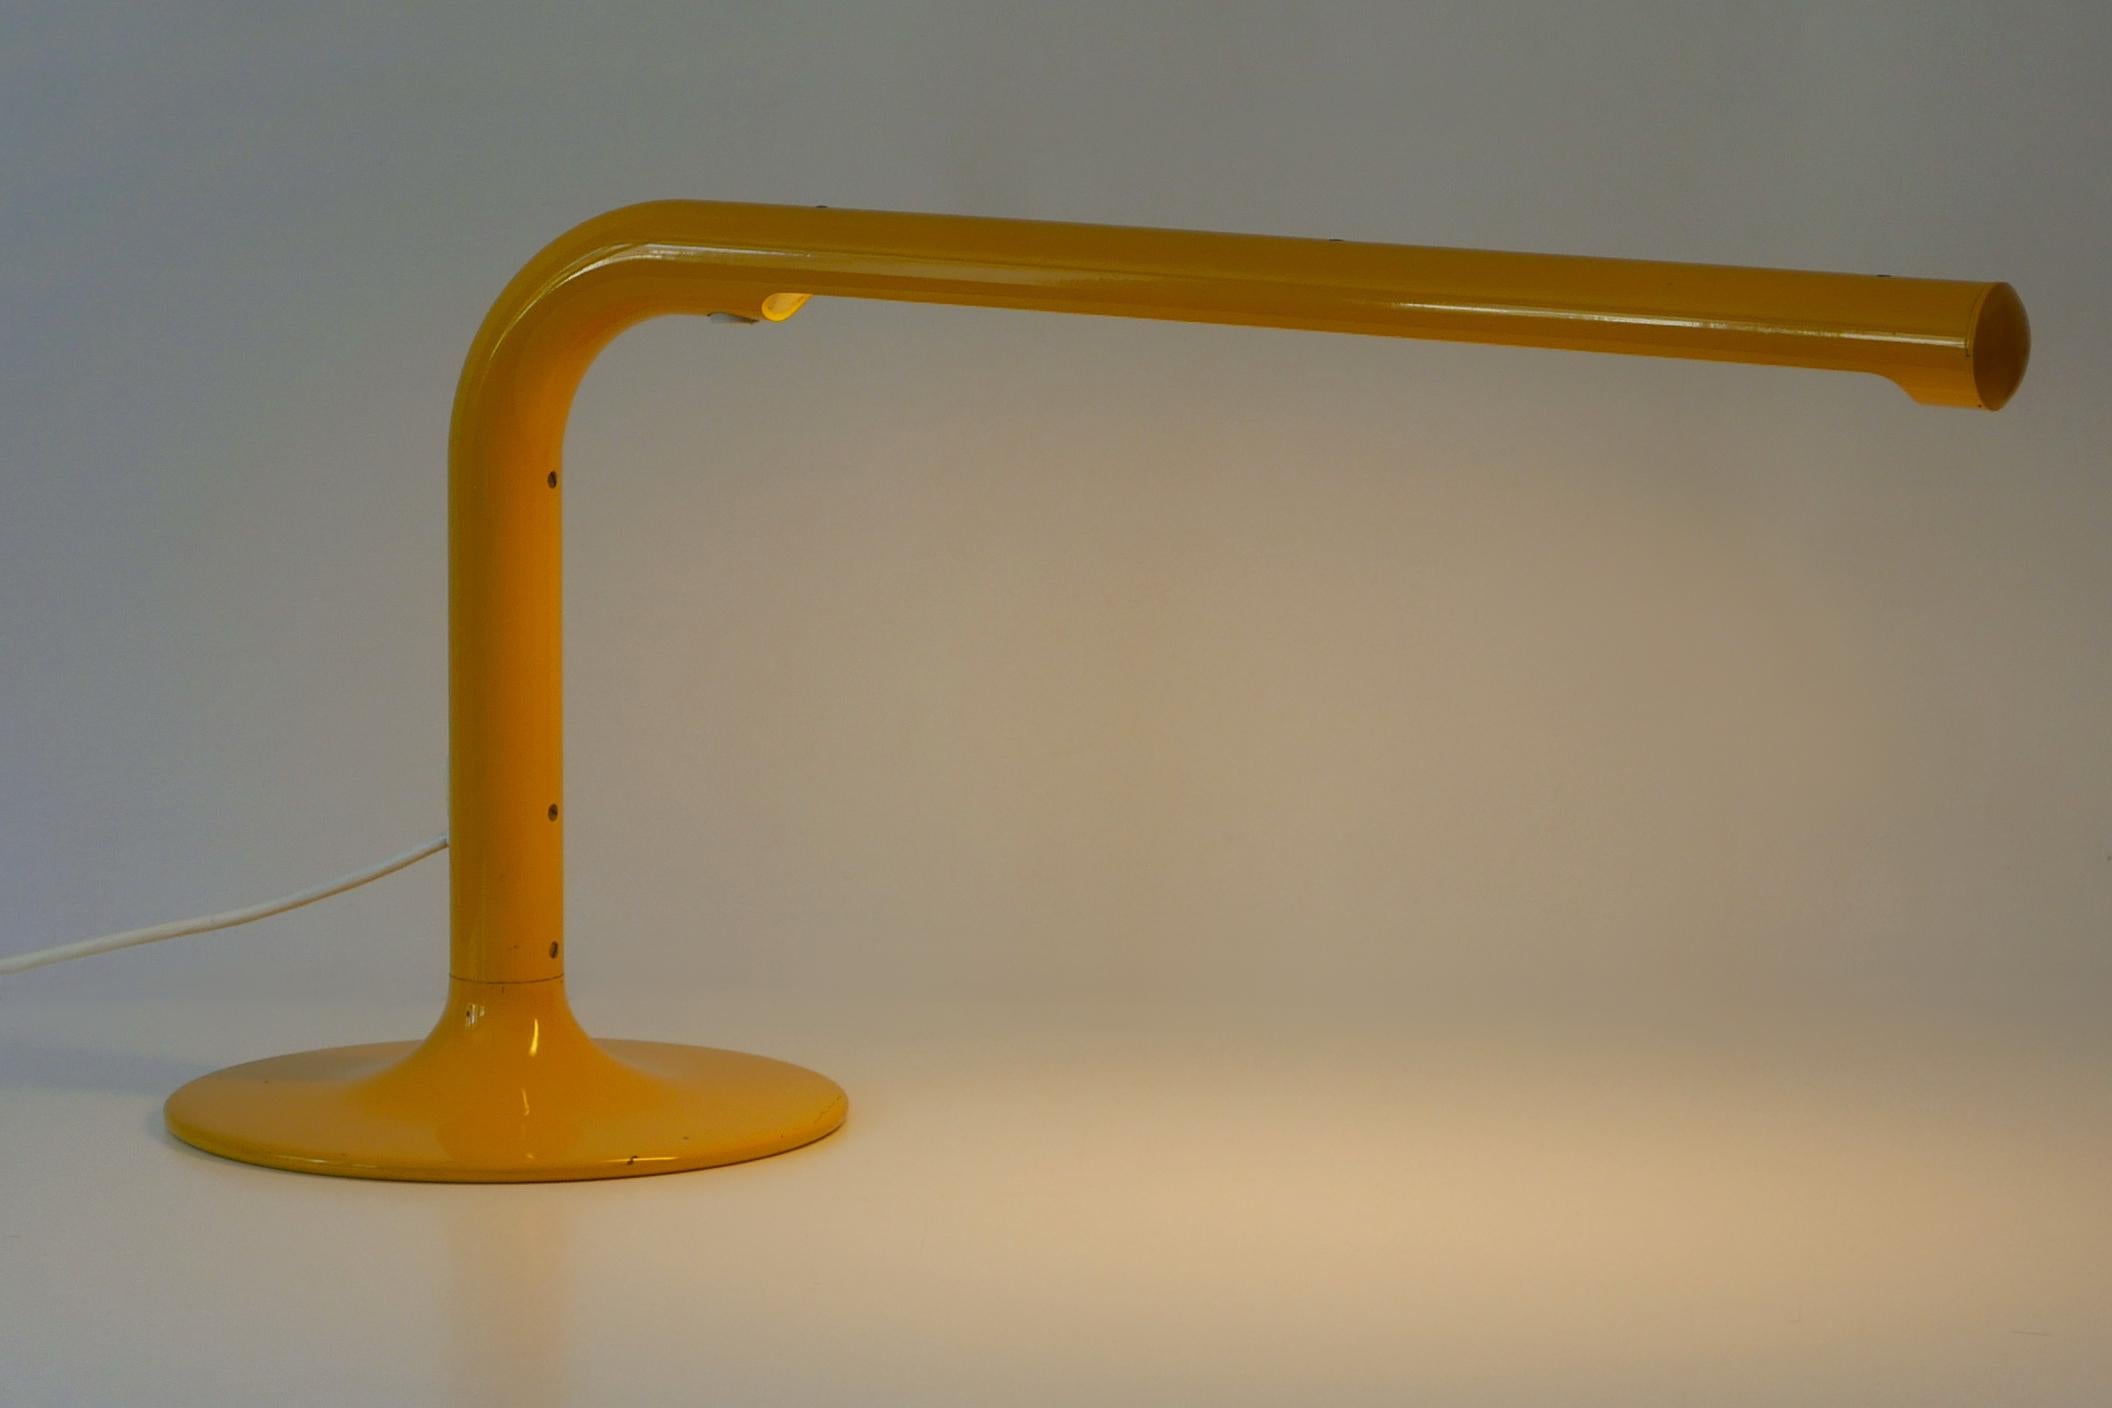 Large & Elegant Tube Table Lamp by Anders Pehrson for Ateljé Lyktan, 1960s For Sale 6